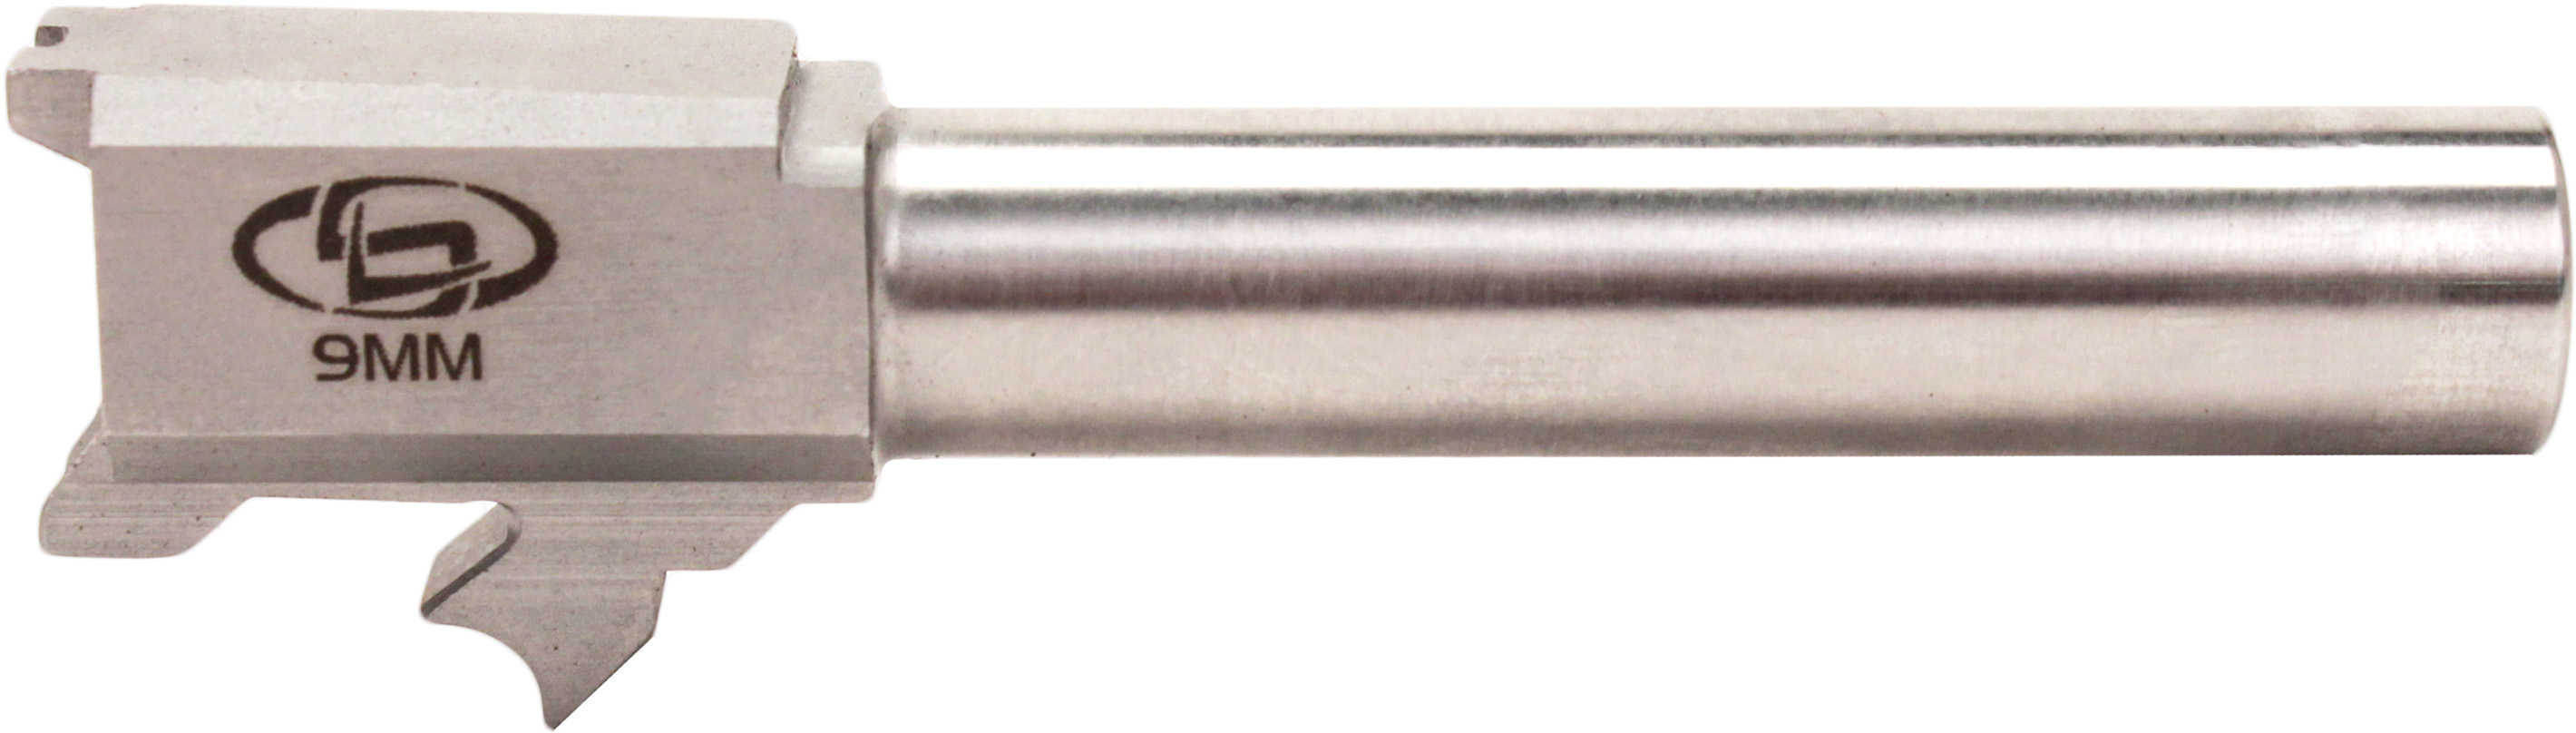 StormLake Barrels Lake 9MM 4.05" Fits Springfield XD Stainless Finish Conversion Converts 40 S&W t 34110